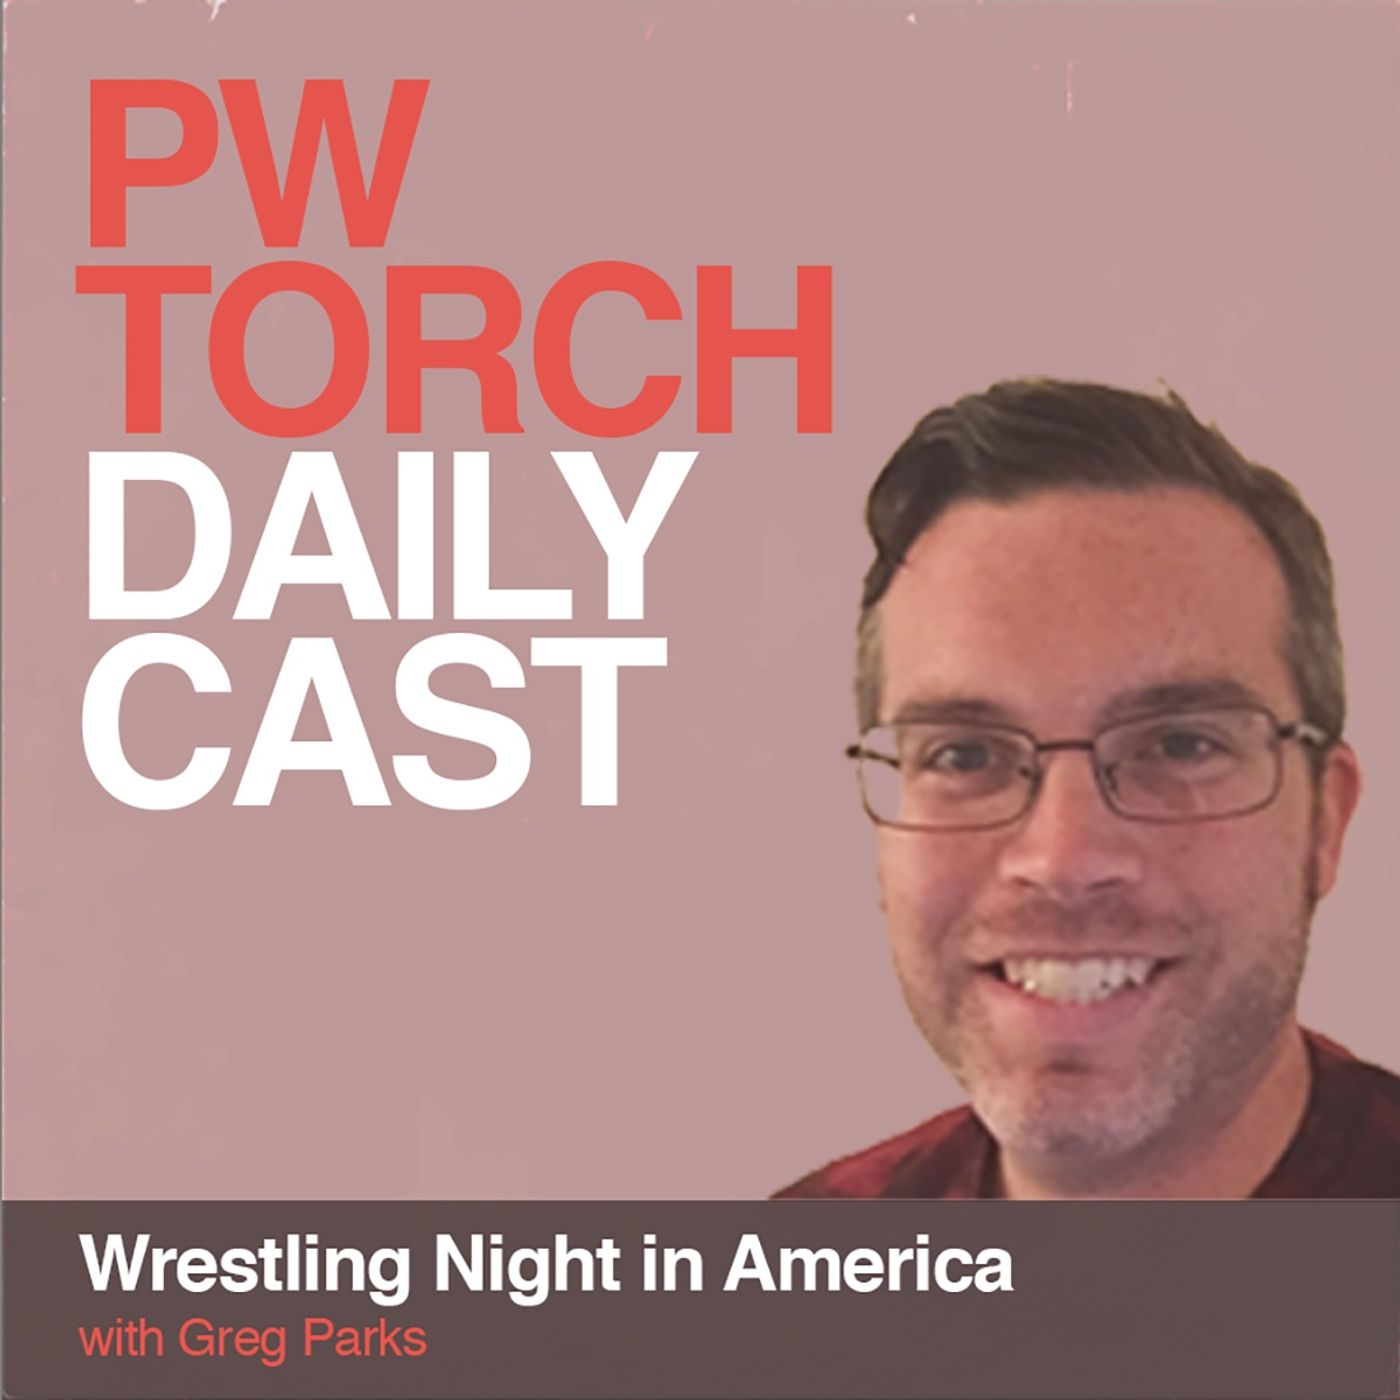 PWTorch Dailycast - Wrestling Night in America - Wells & Cattani talk Jey Uso and the next big step in Bloodline saga, Punk's return to AEW